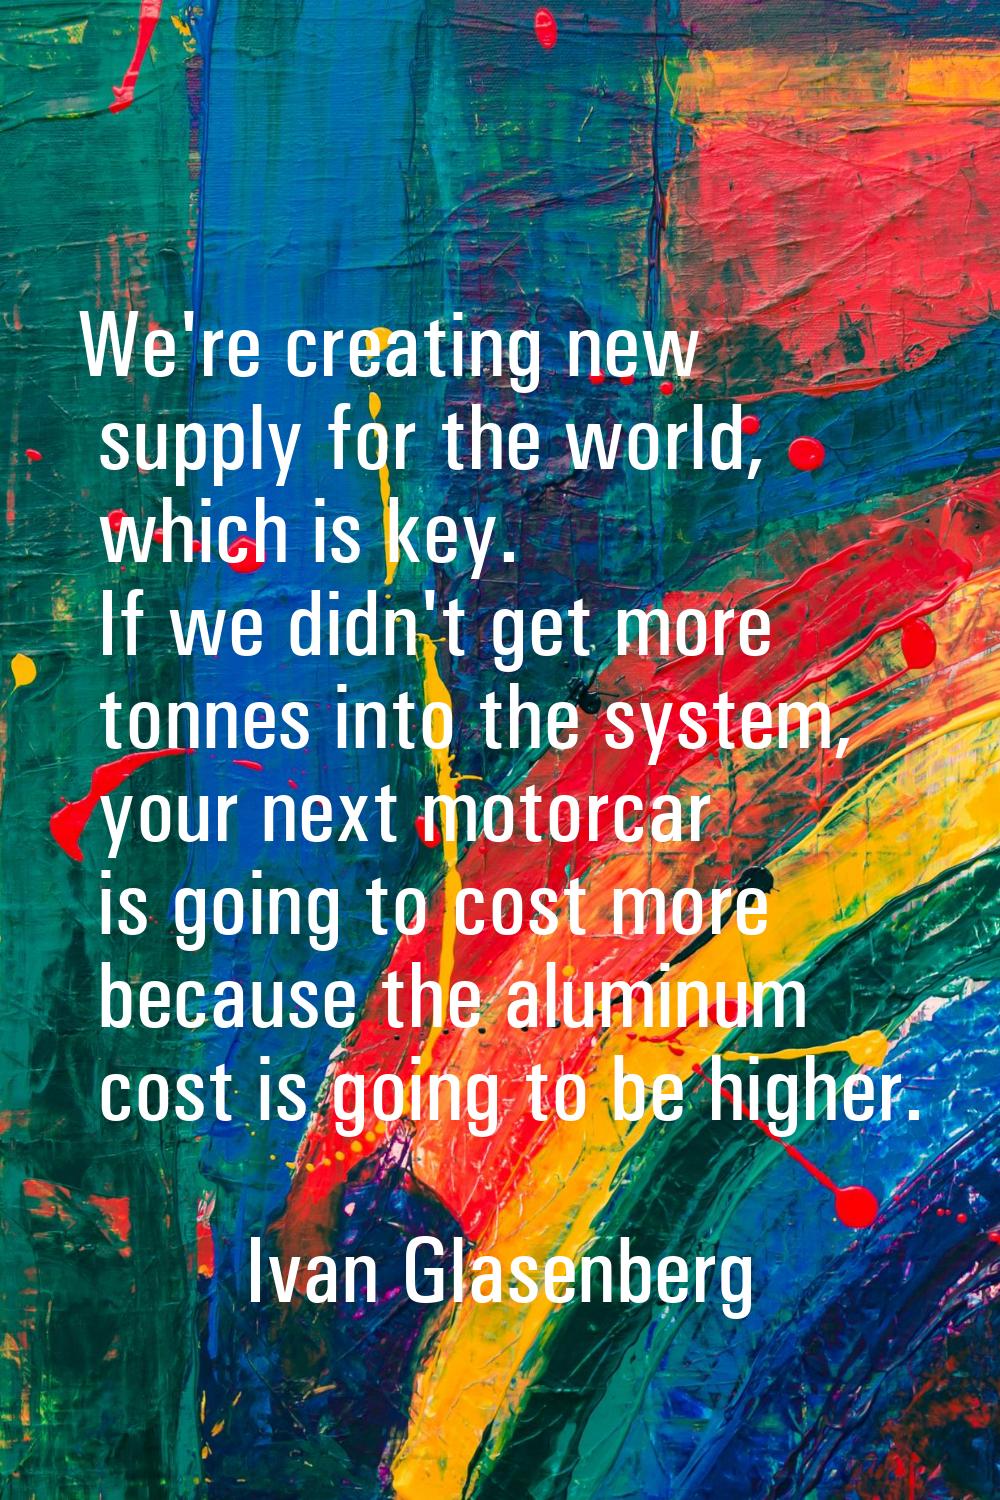 We're creating new supply for the world, which is key. If we didn't get more tonnes into the system